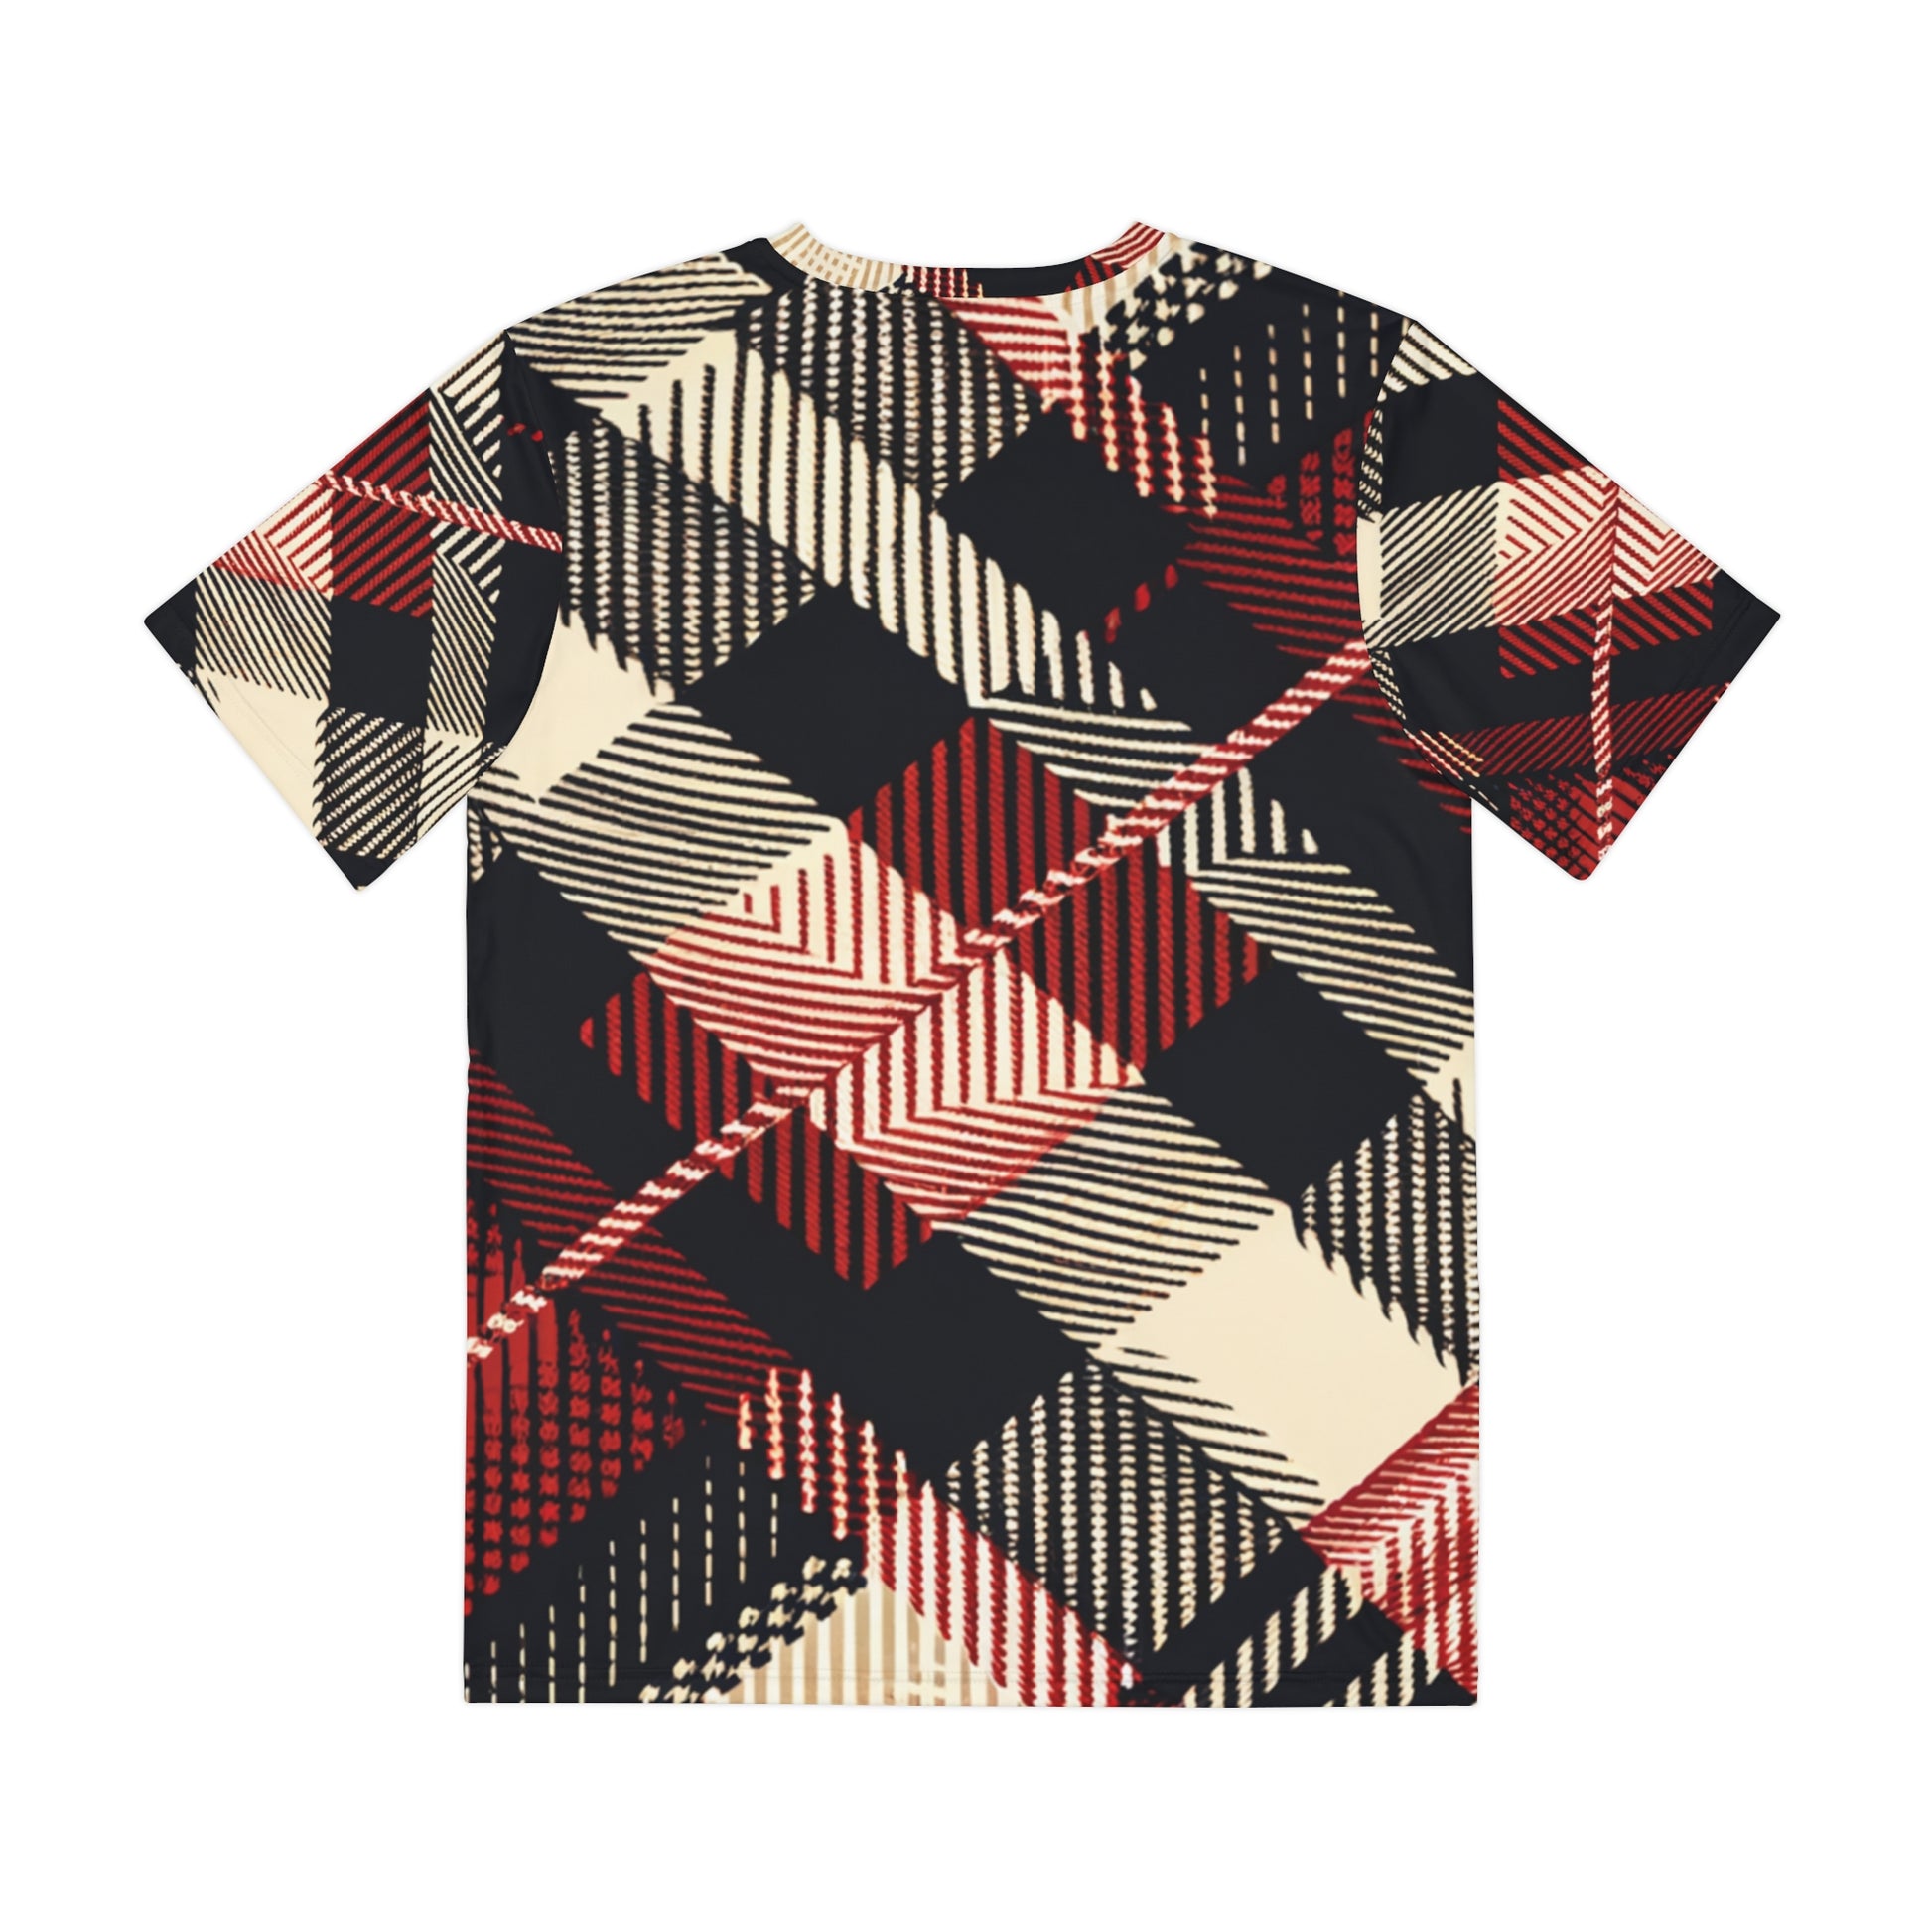 Back view of the Crimson Houndstooth Cascade Crewneck Pullover All-Over Print Short-Sleeved Shirt